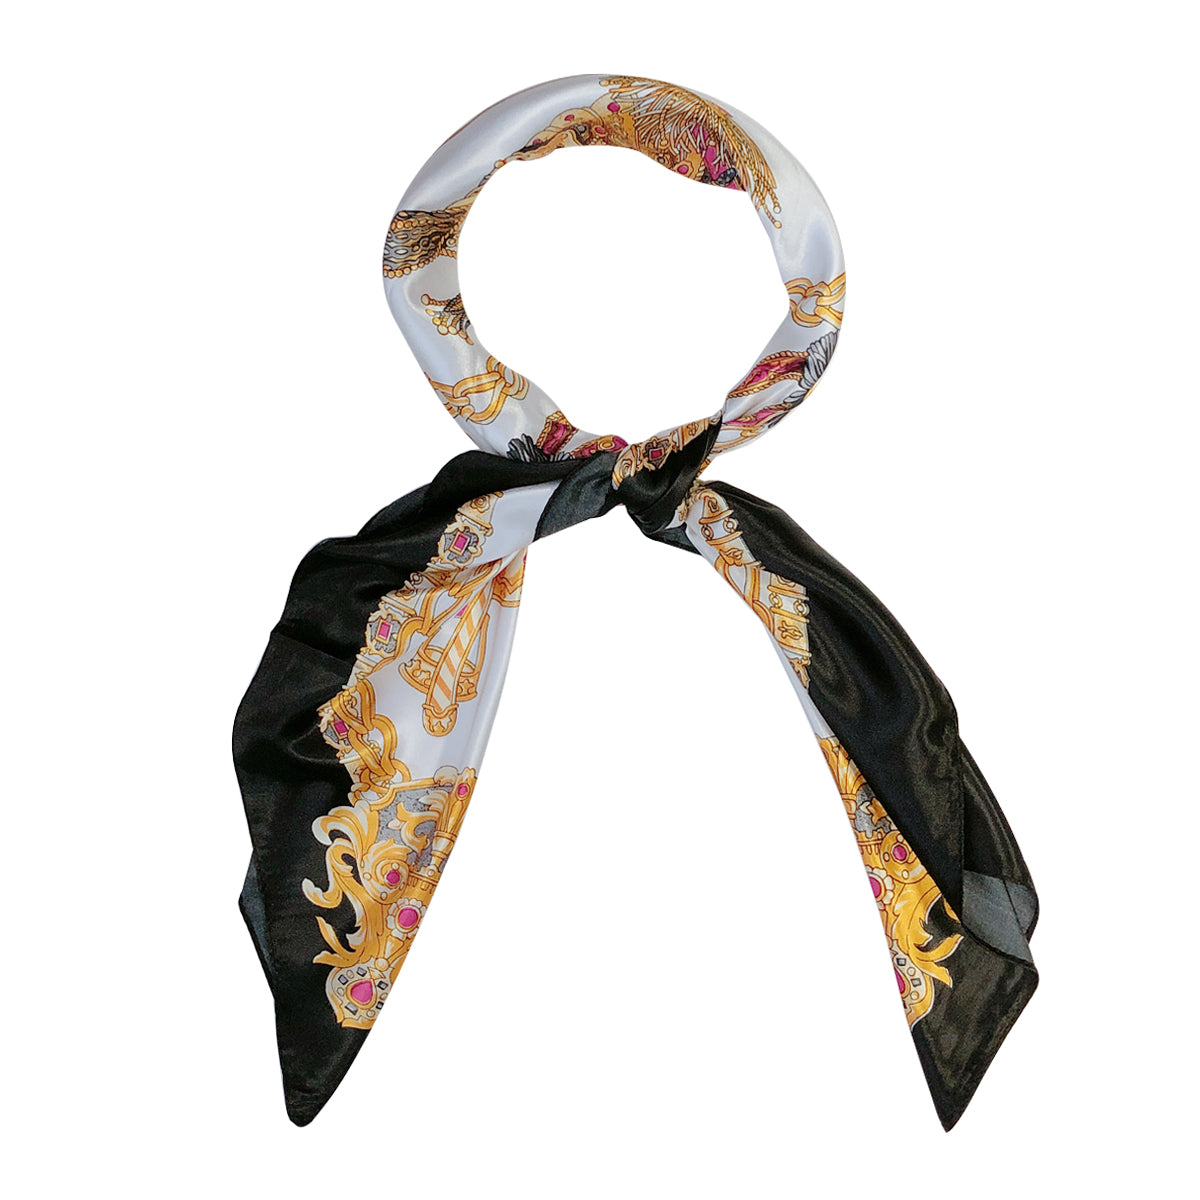 Wrapables Silky Feeling Satin Square Scarf